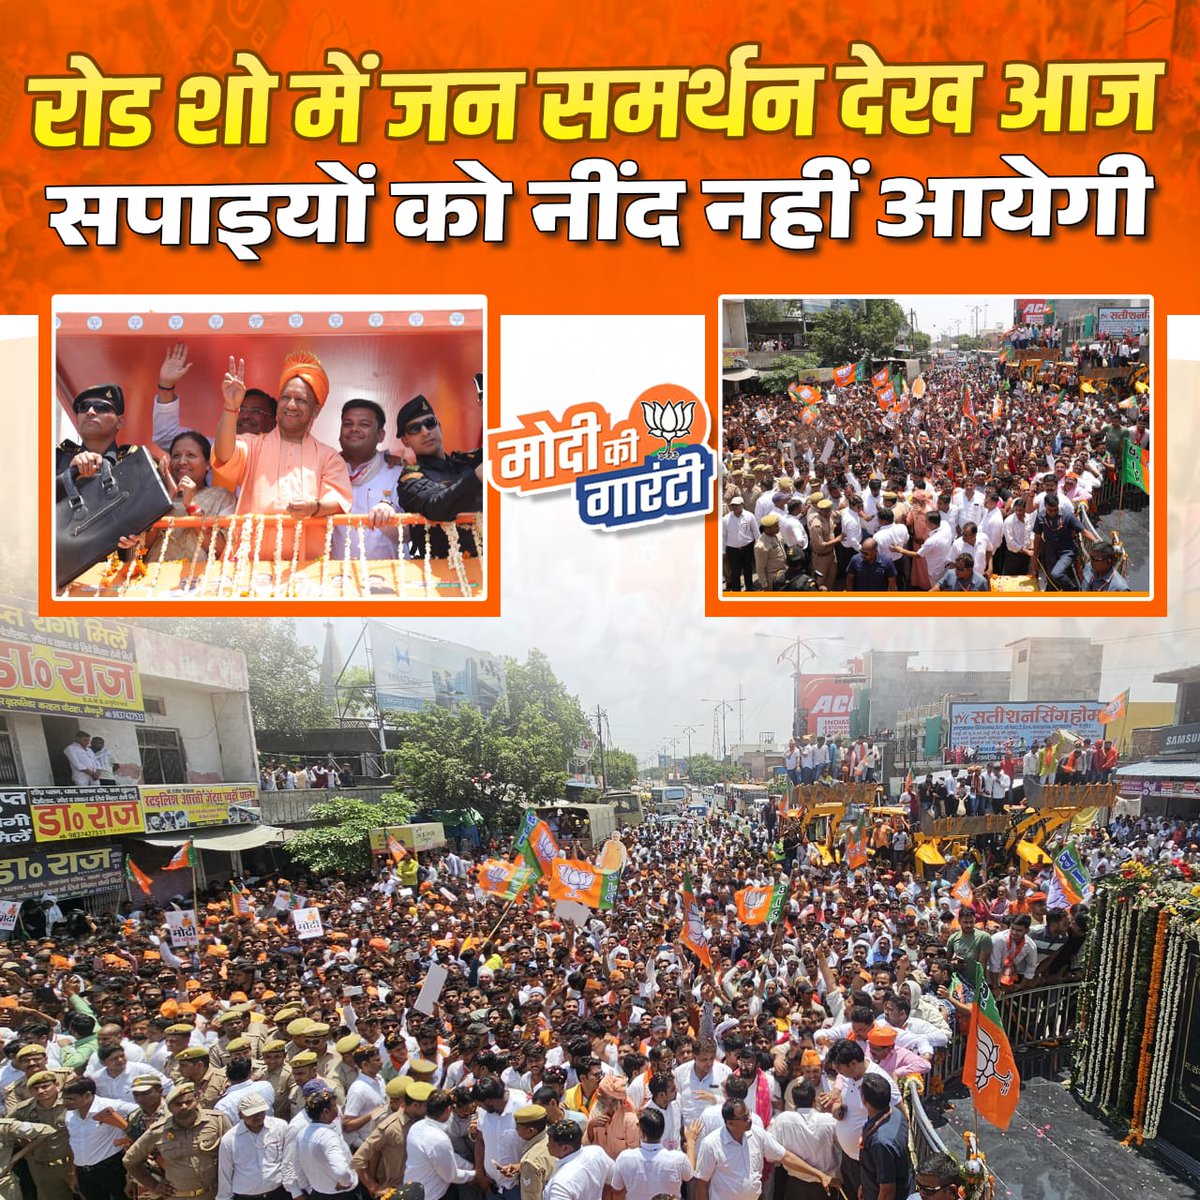 Mainpuri's affection for CM Yogi in his roadshow today is becoming the cornerstone of Jayveer Singh's overwhelming support in the constituency.
#MainpuriLovesYogi